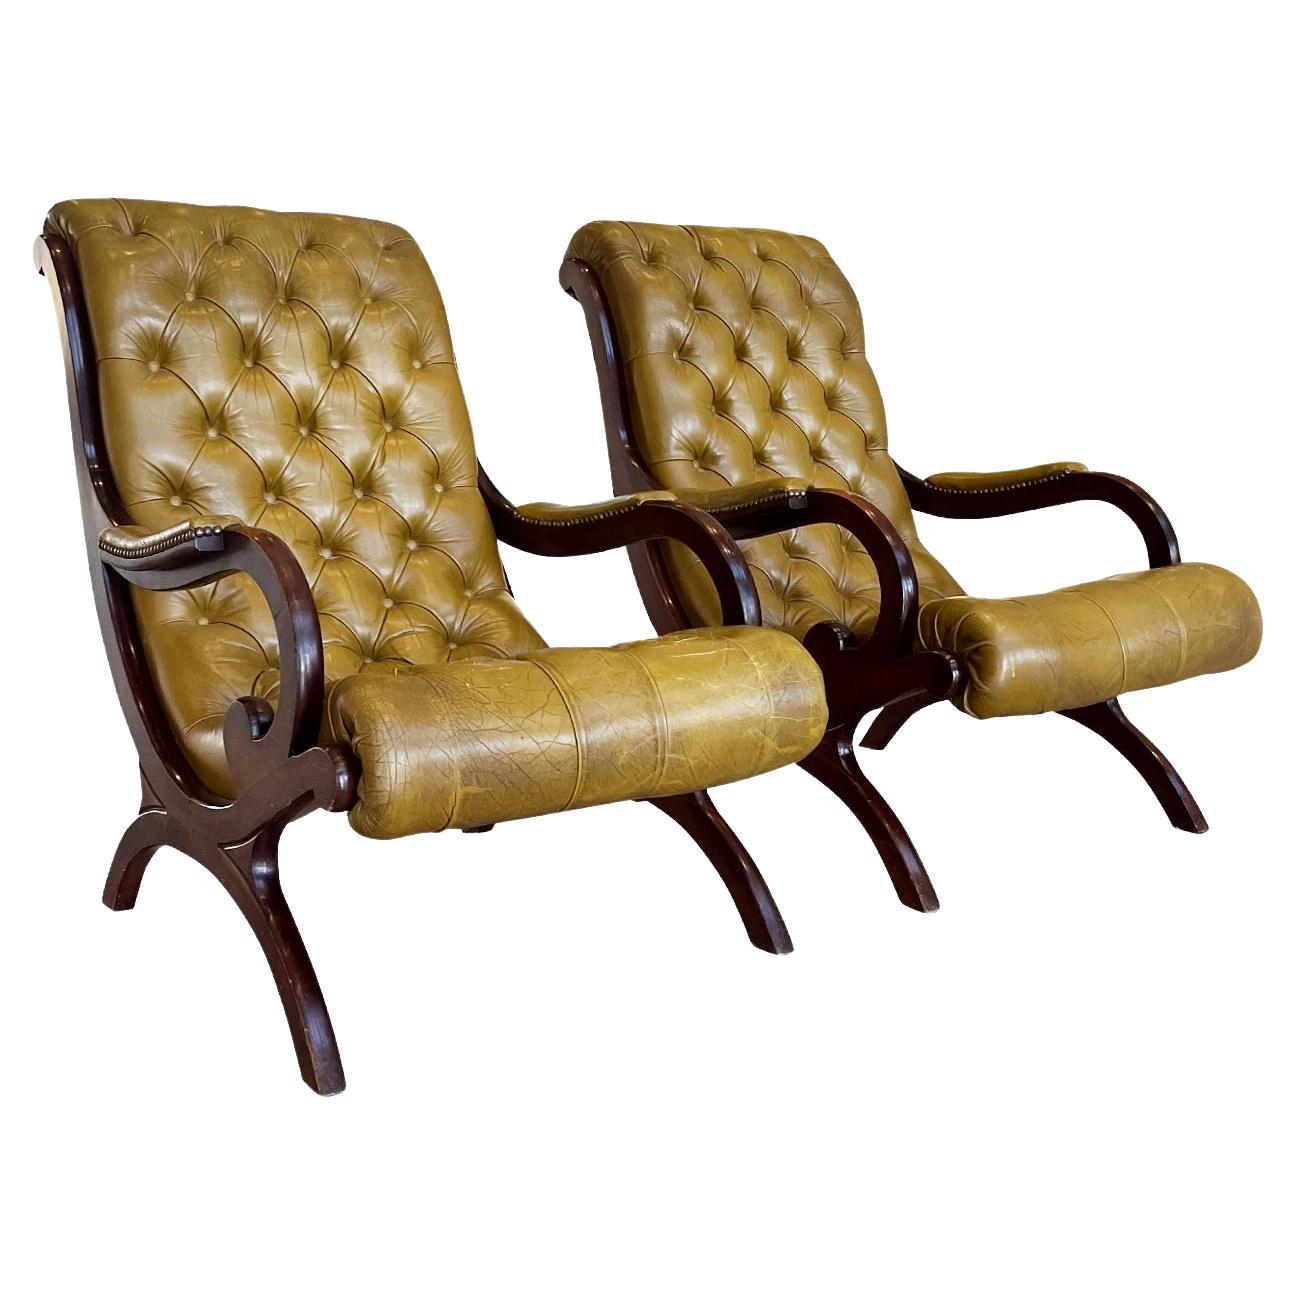 20th Century Regency Style Leather & Mahogany Armchairs, Pair For Sale